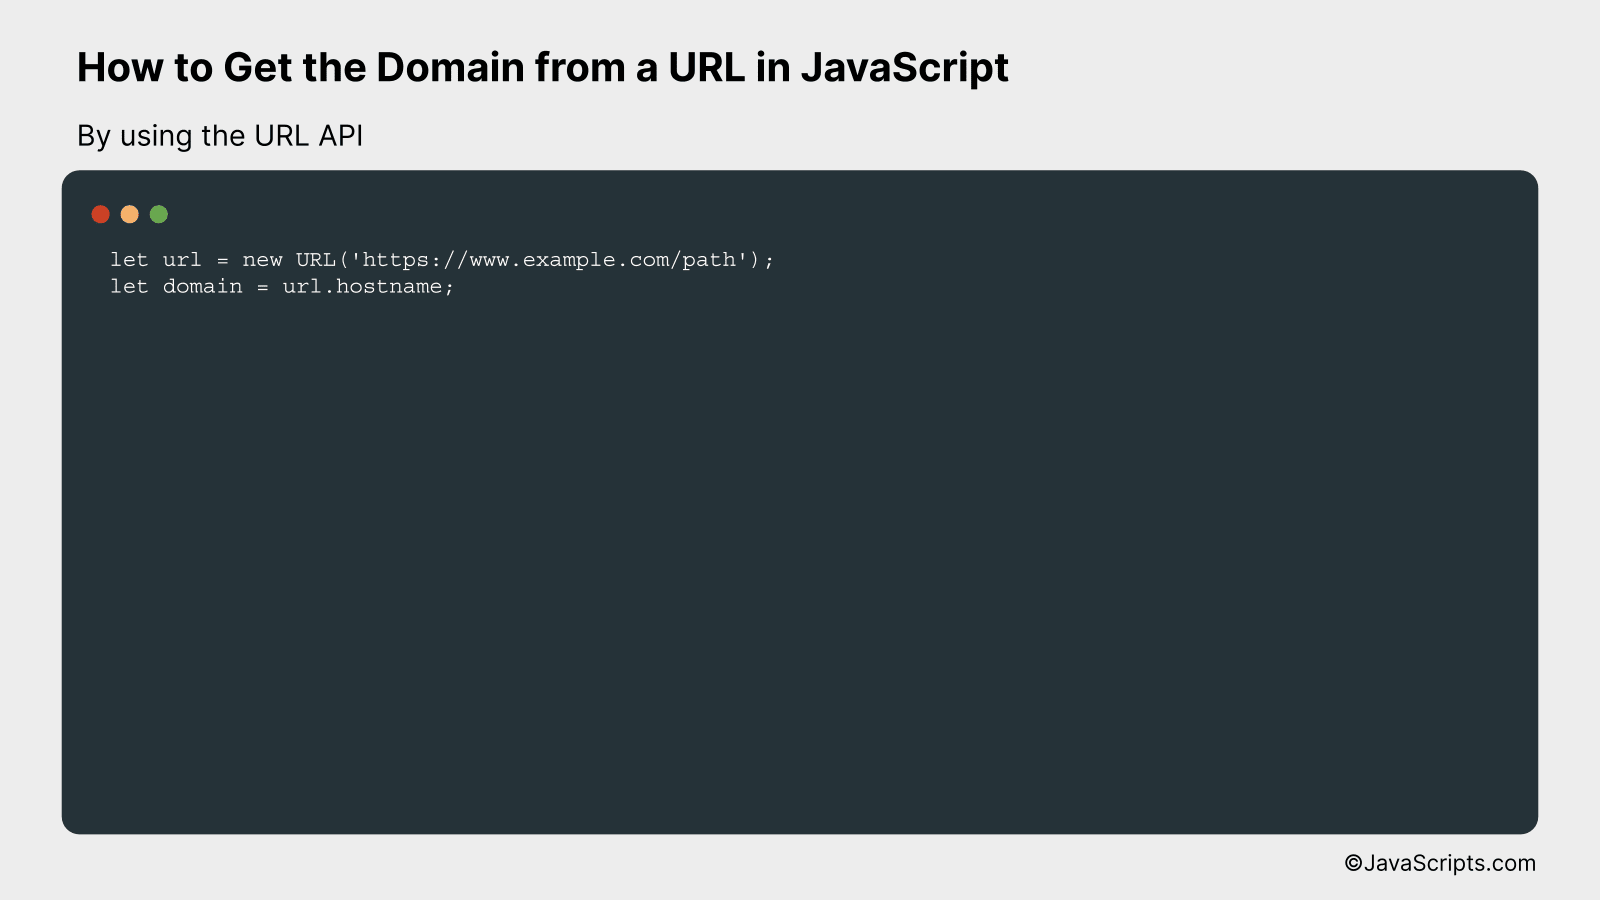 By using the URL API